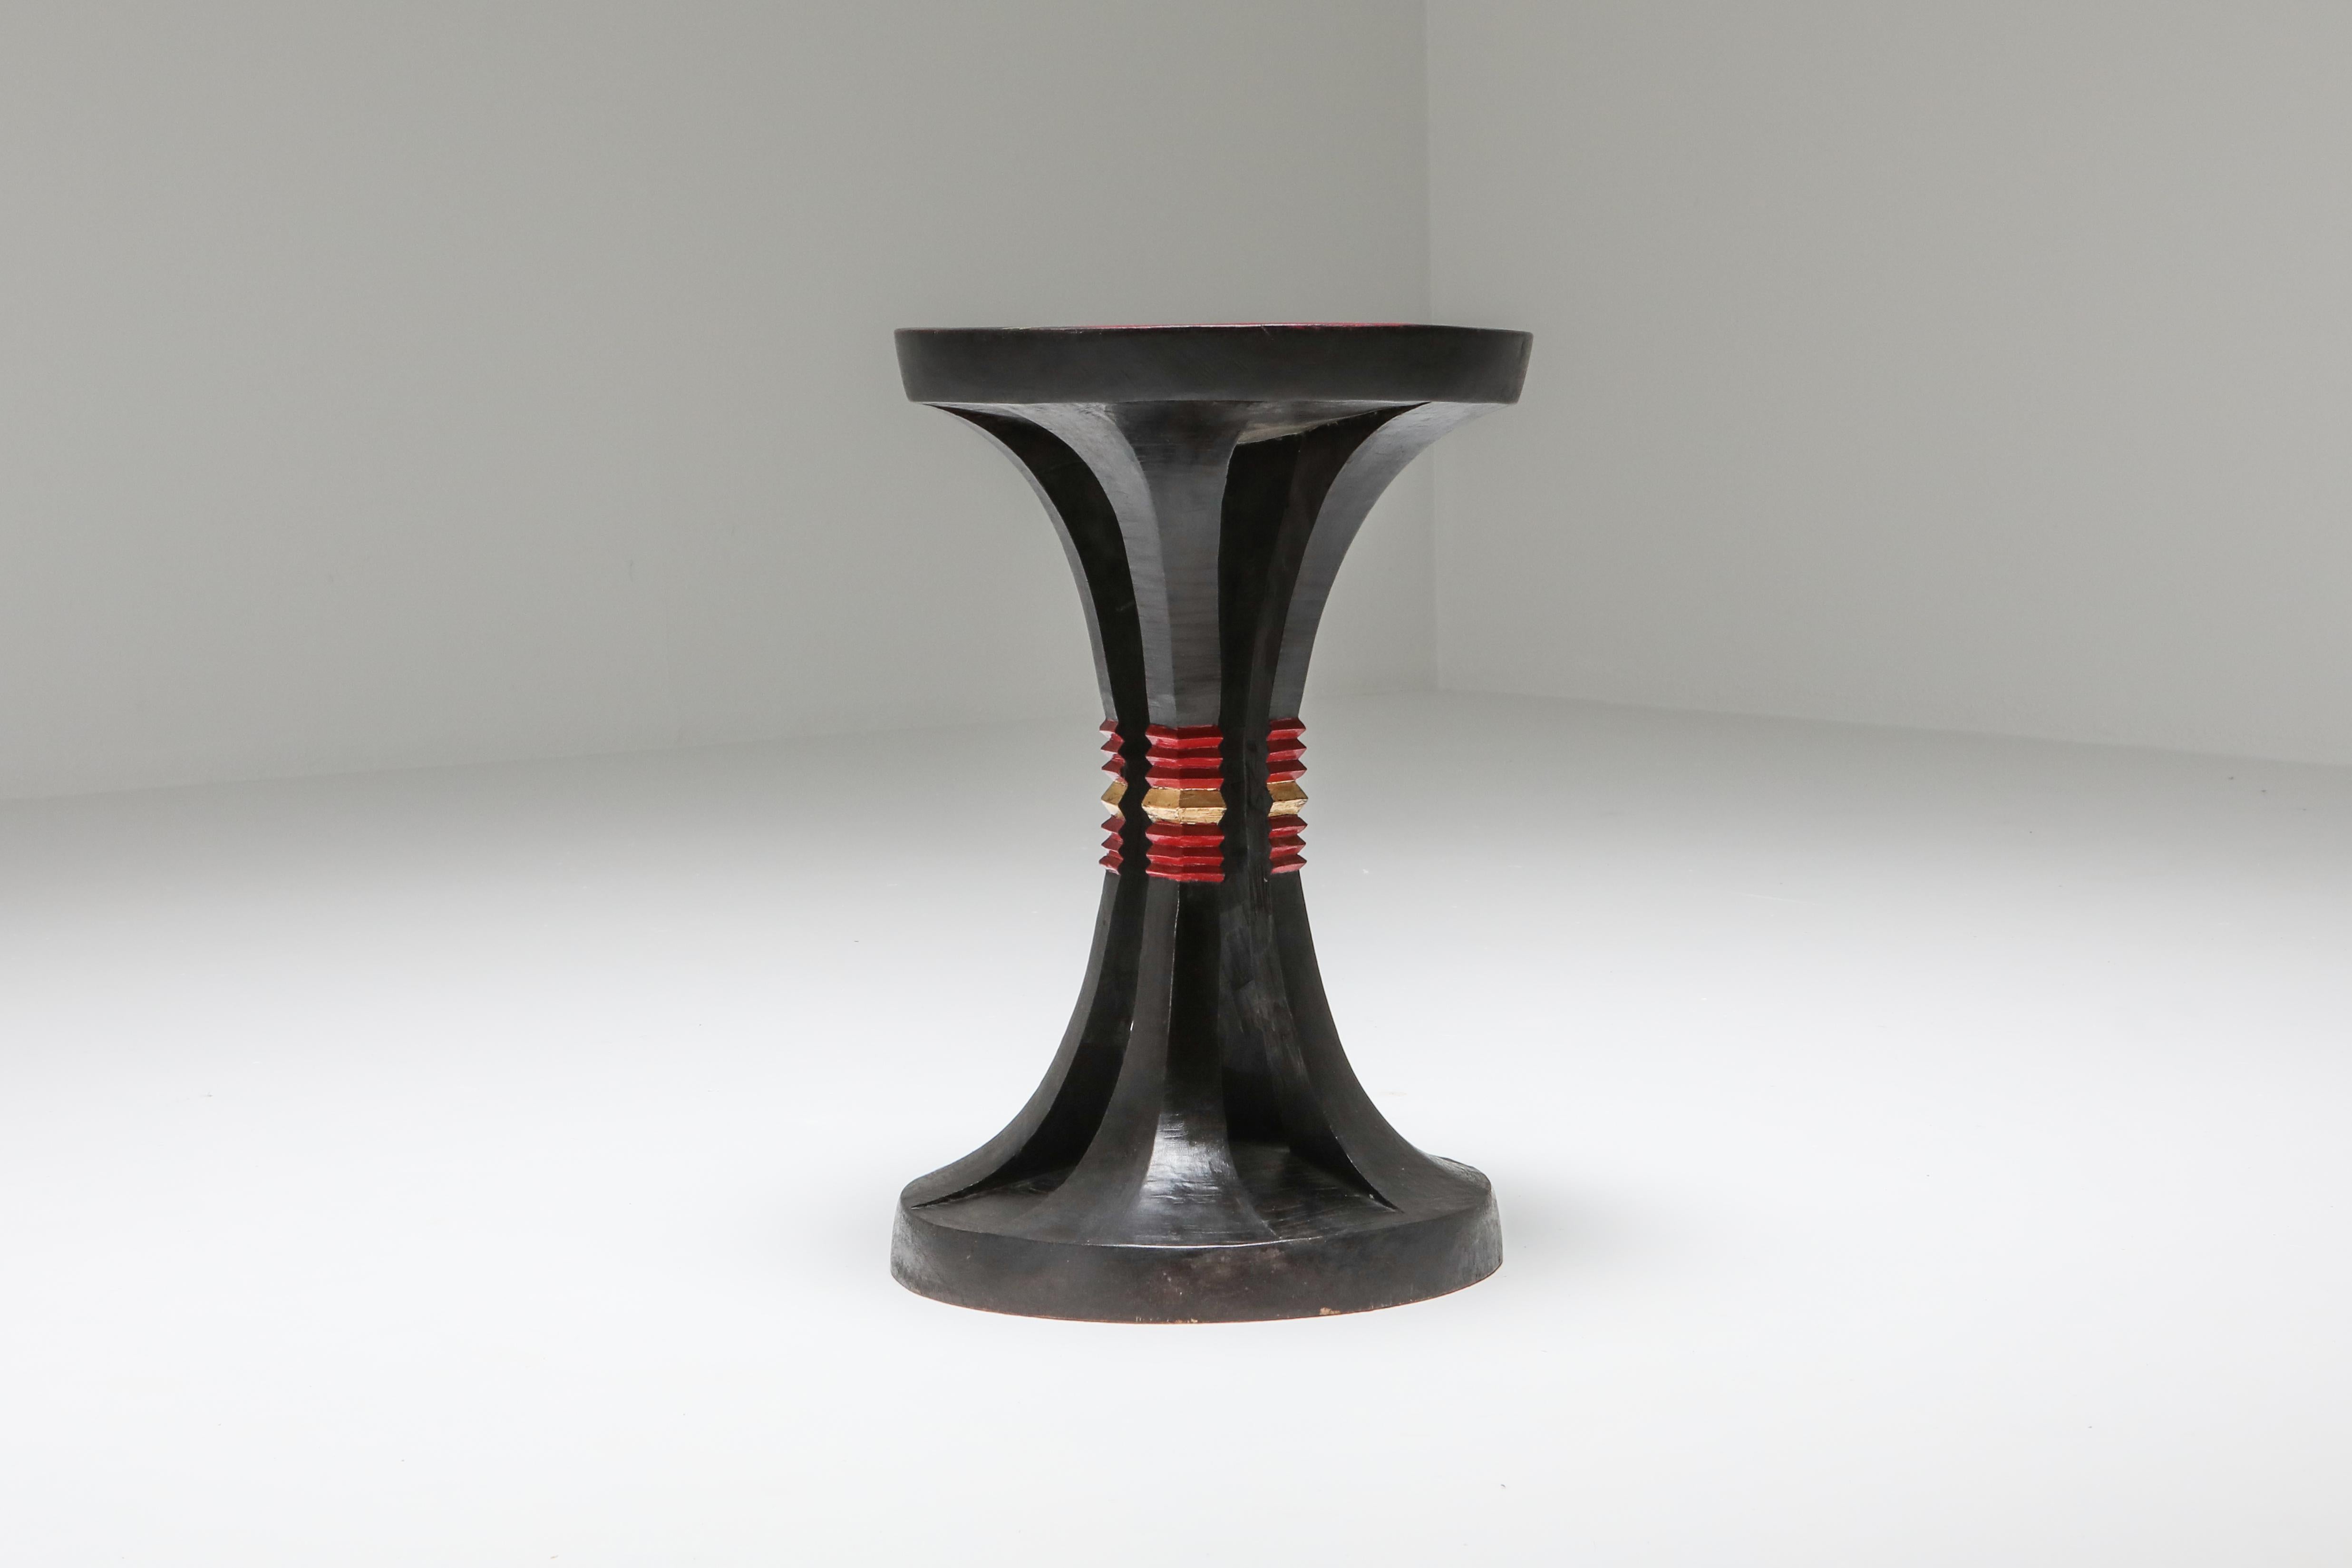 French 1940s stool in ebonized wood, with red lacquer and gold leaf

Would fit well in an eclectic evocative decor inspired by Kelly Wearstler.
       